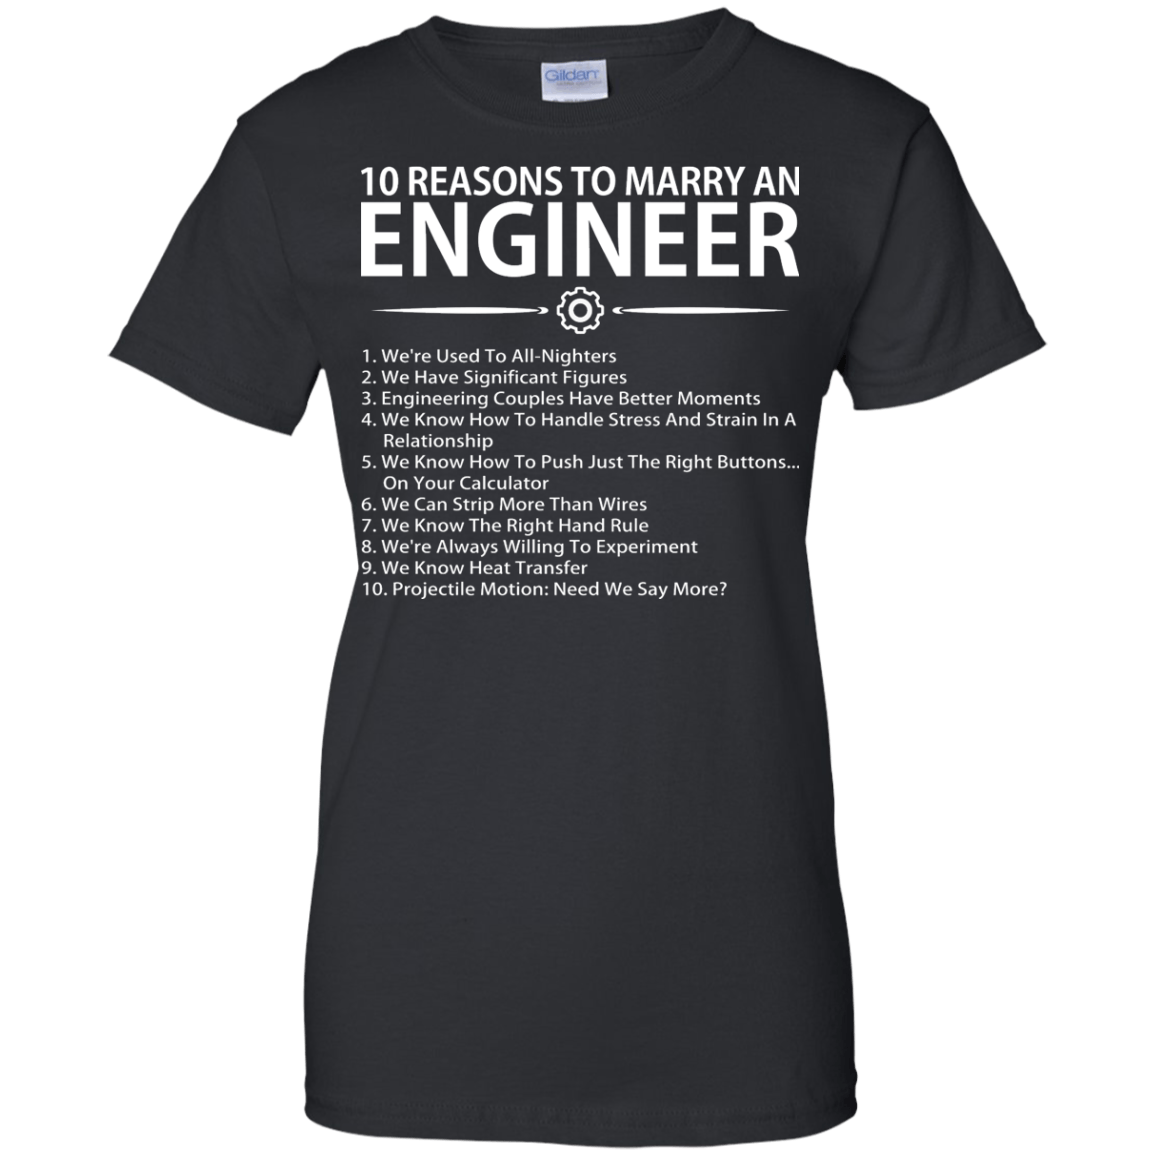 10 Reasons To Marry An Engineer - Engineering Outfitters